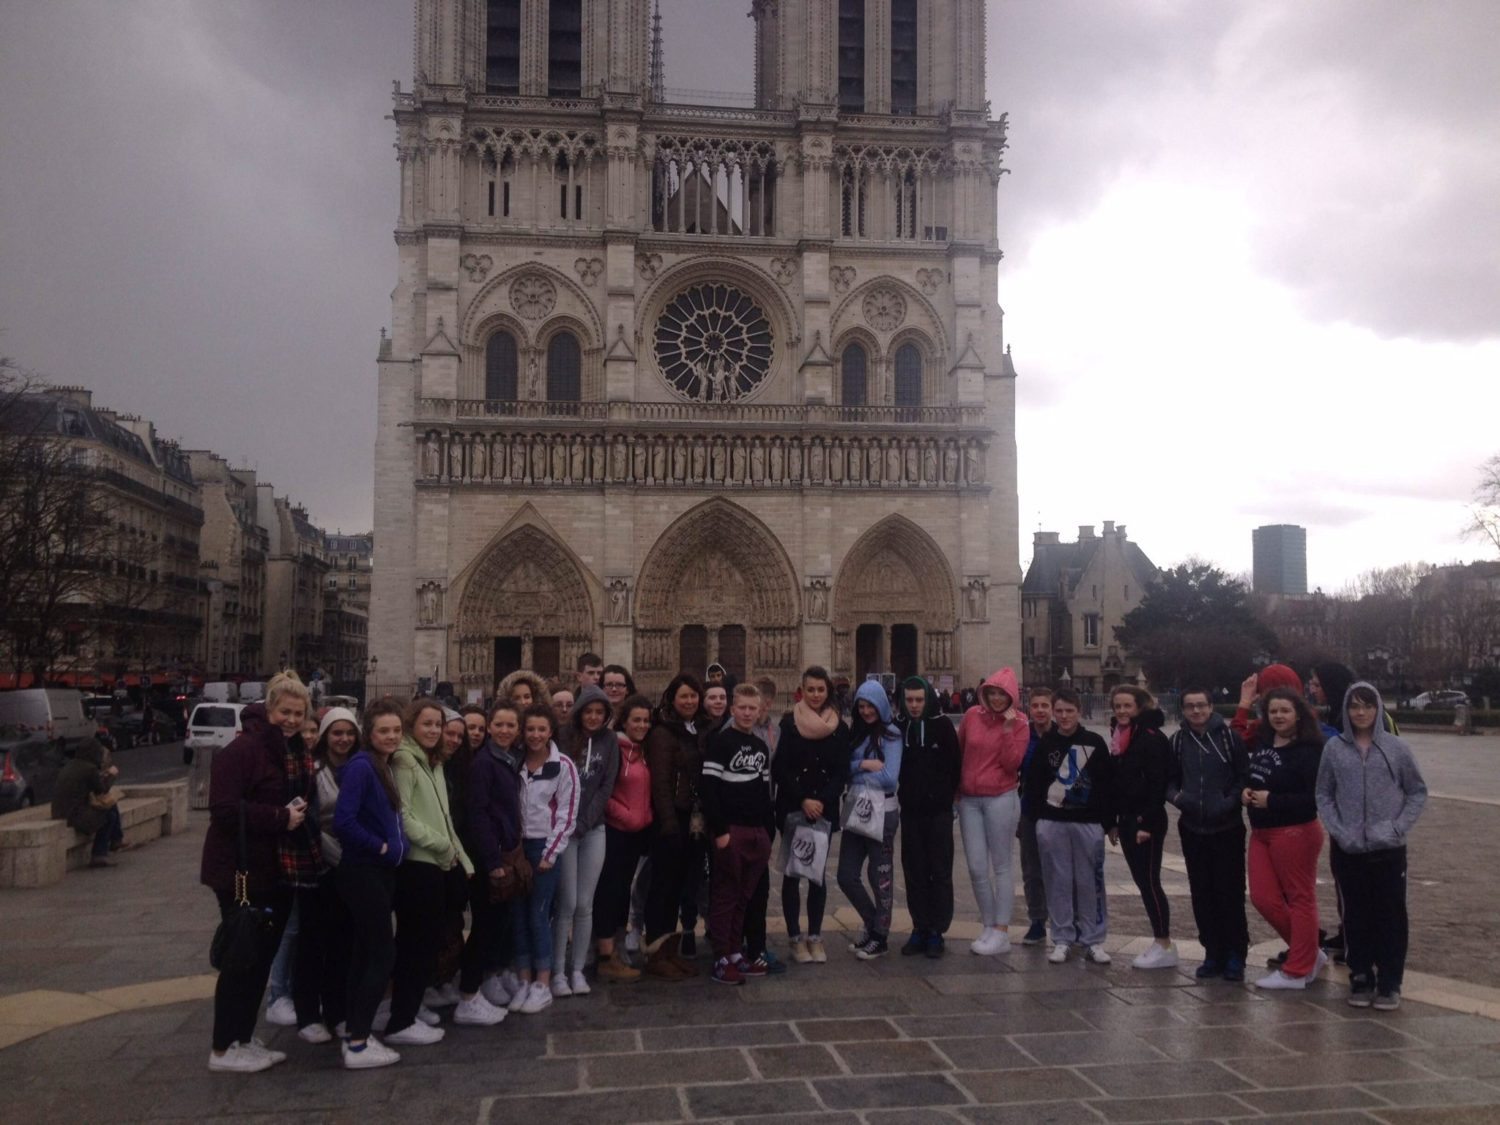 The Desmond College French Tour Group visits the Famous Notre Dame in Paris